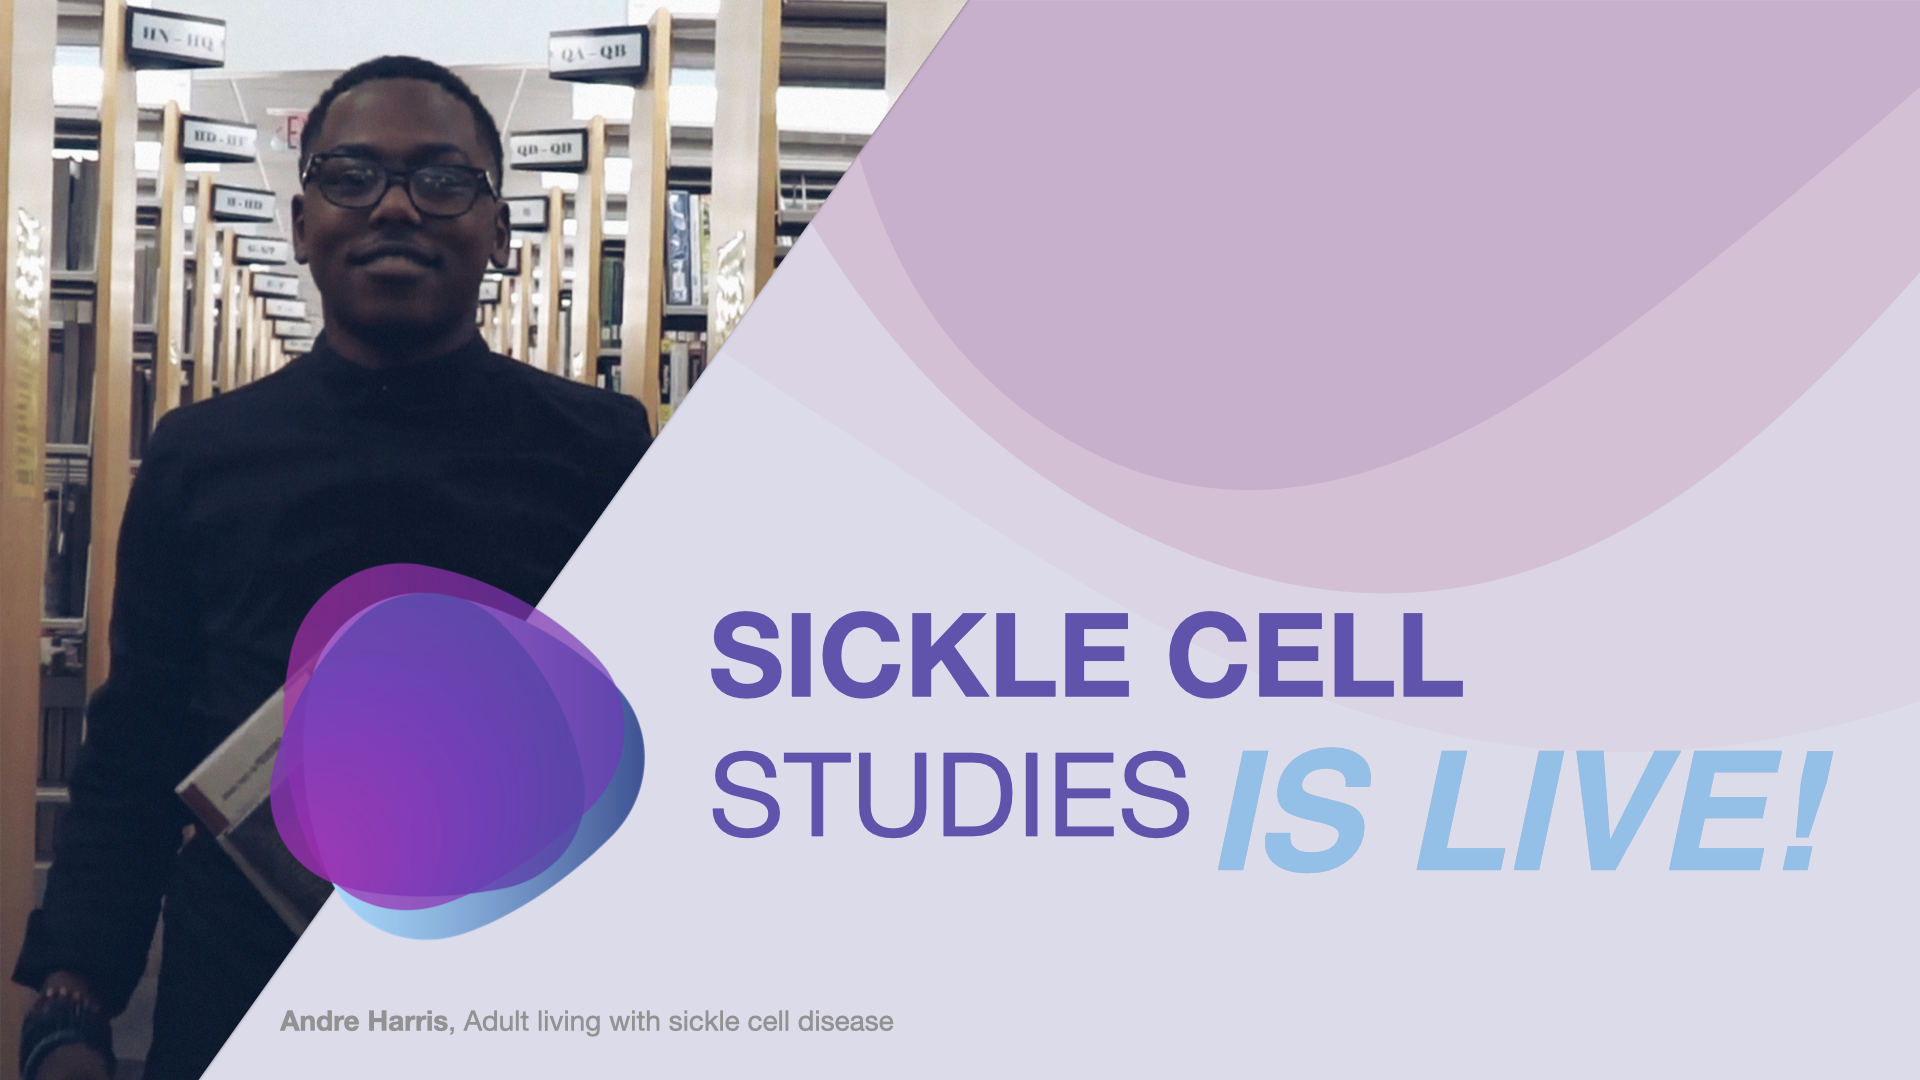 Launch of Sickle Cell Studies On International Clinical Trials Day